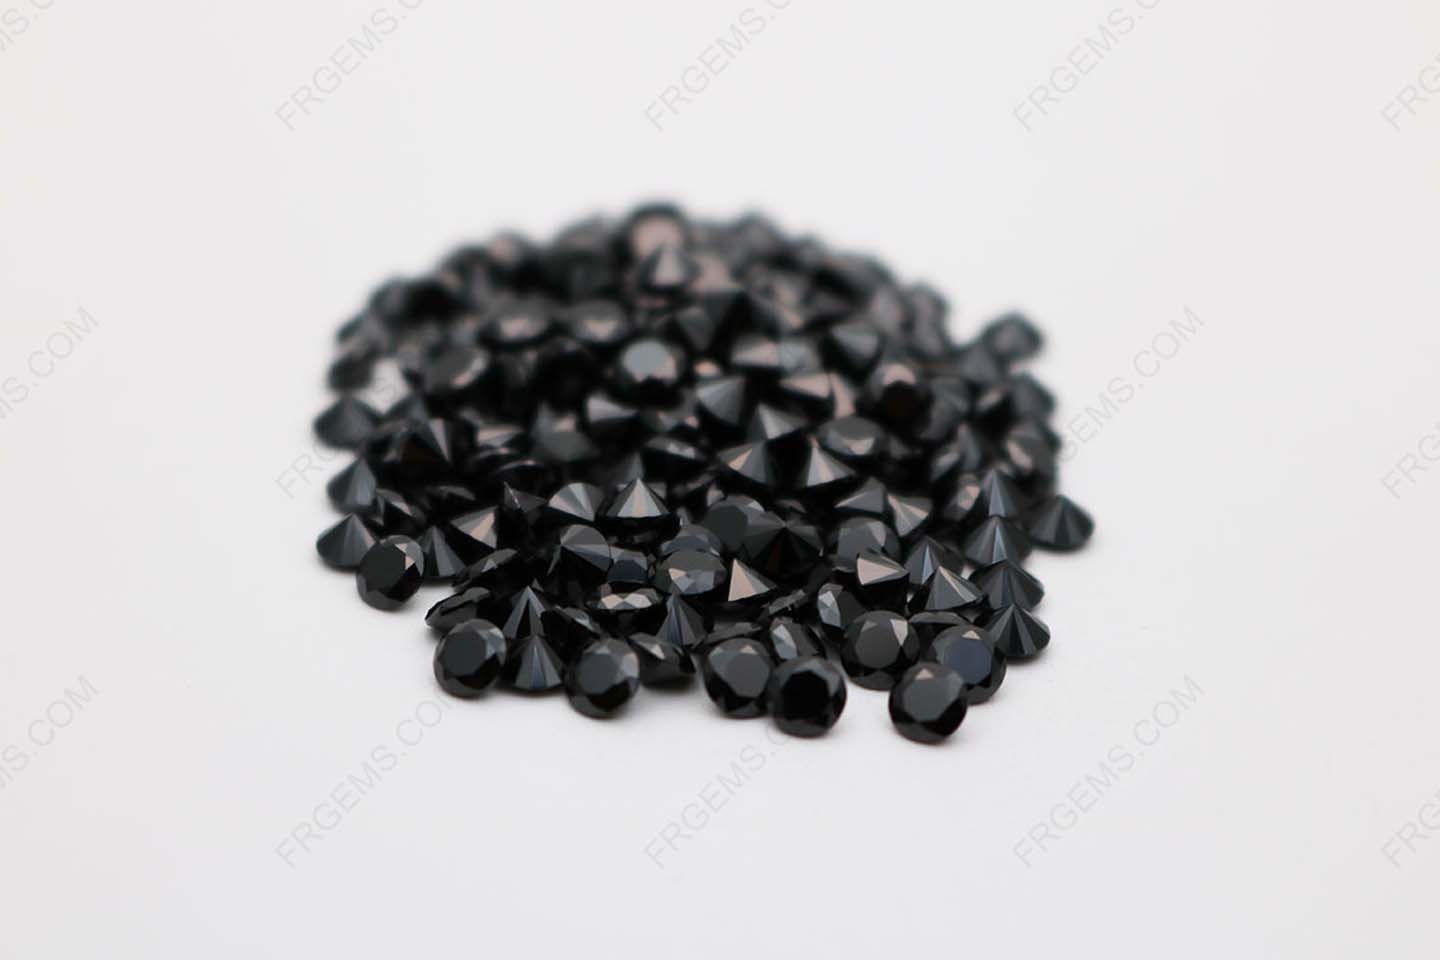 Cubic Zirconia Black Color Round Shape faceted 6mm stones CZ02 IMG_0355